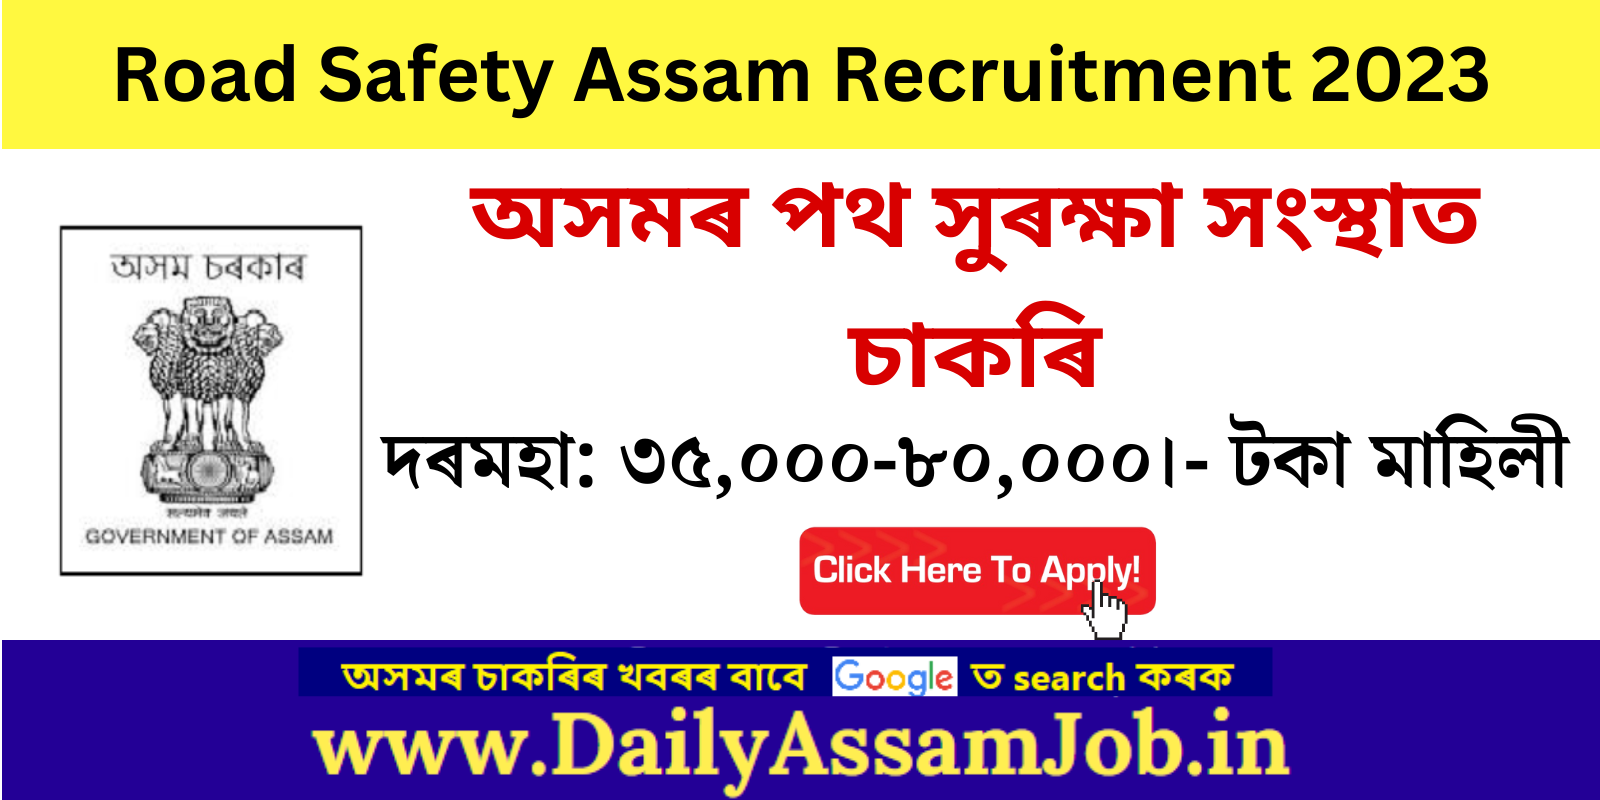 Assam Career :: Road Safety Assam Recruitment 2023 for 05 IT Engineer and Procurement Expert Vacancy